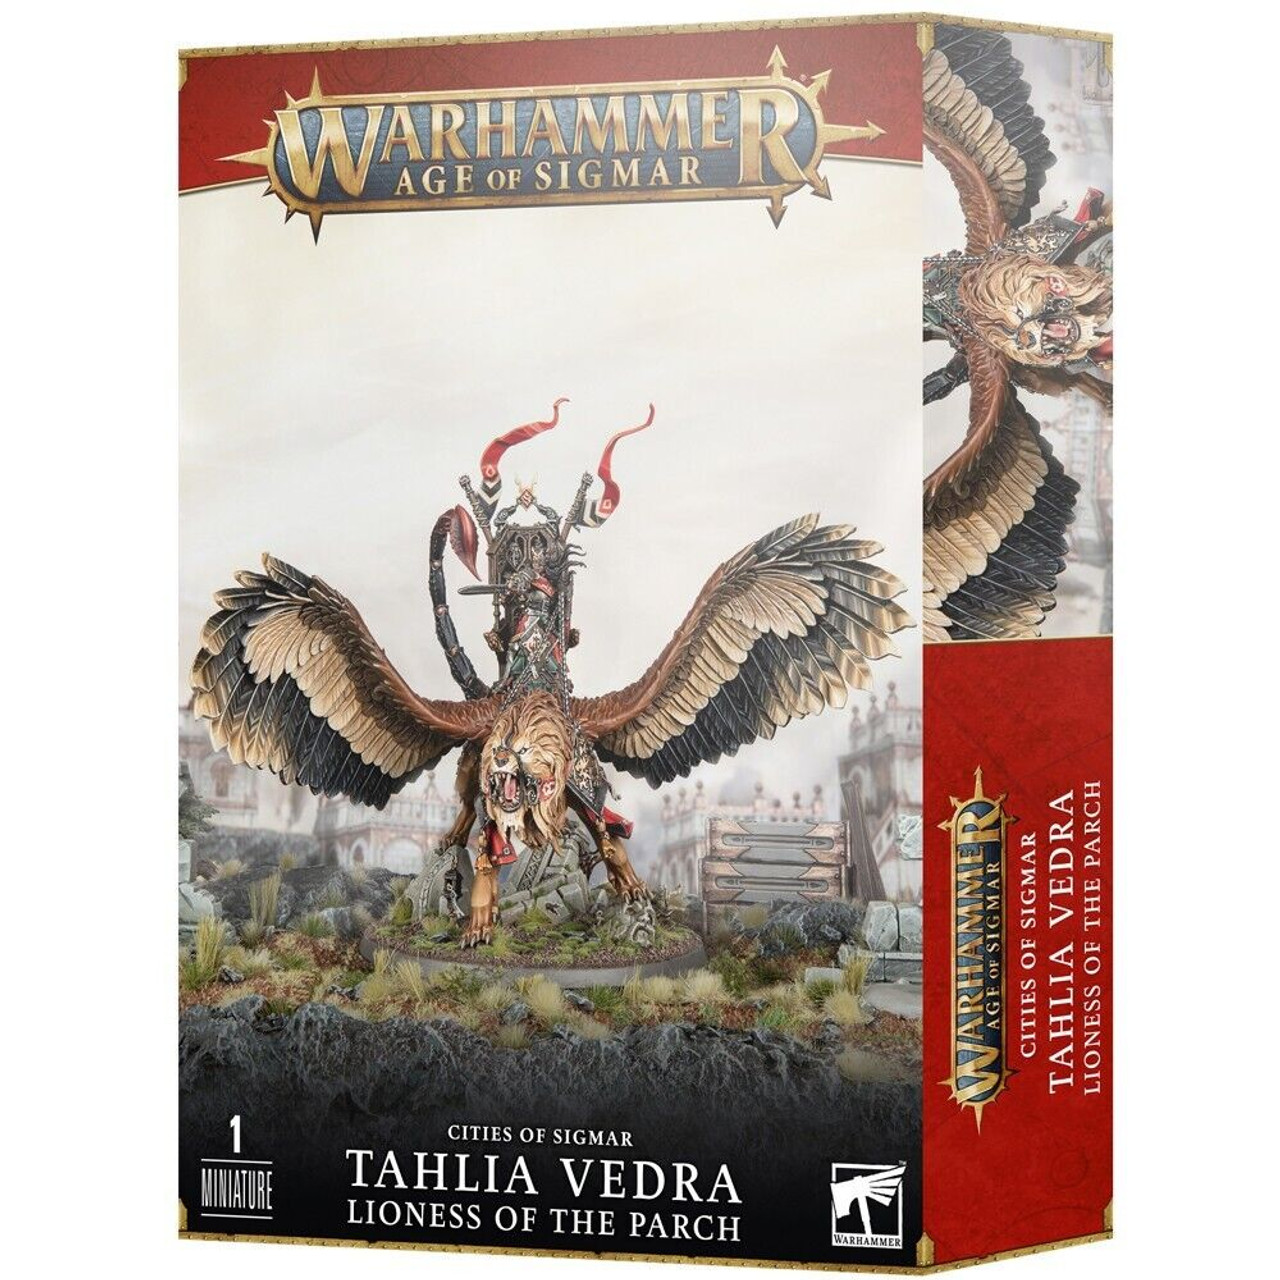 Warhammer Age of Sigmar: Cities of Sigmar - Tahlia Vedra Lioness of the Parch